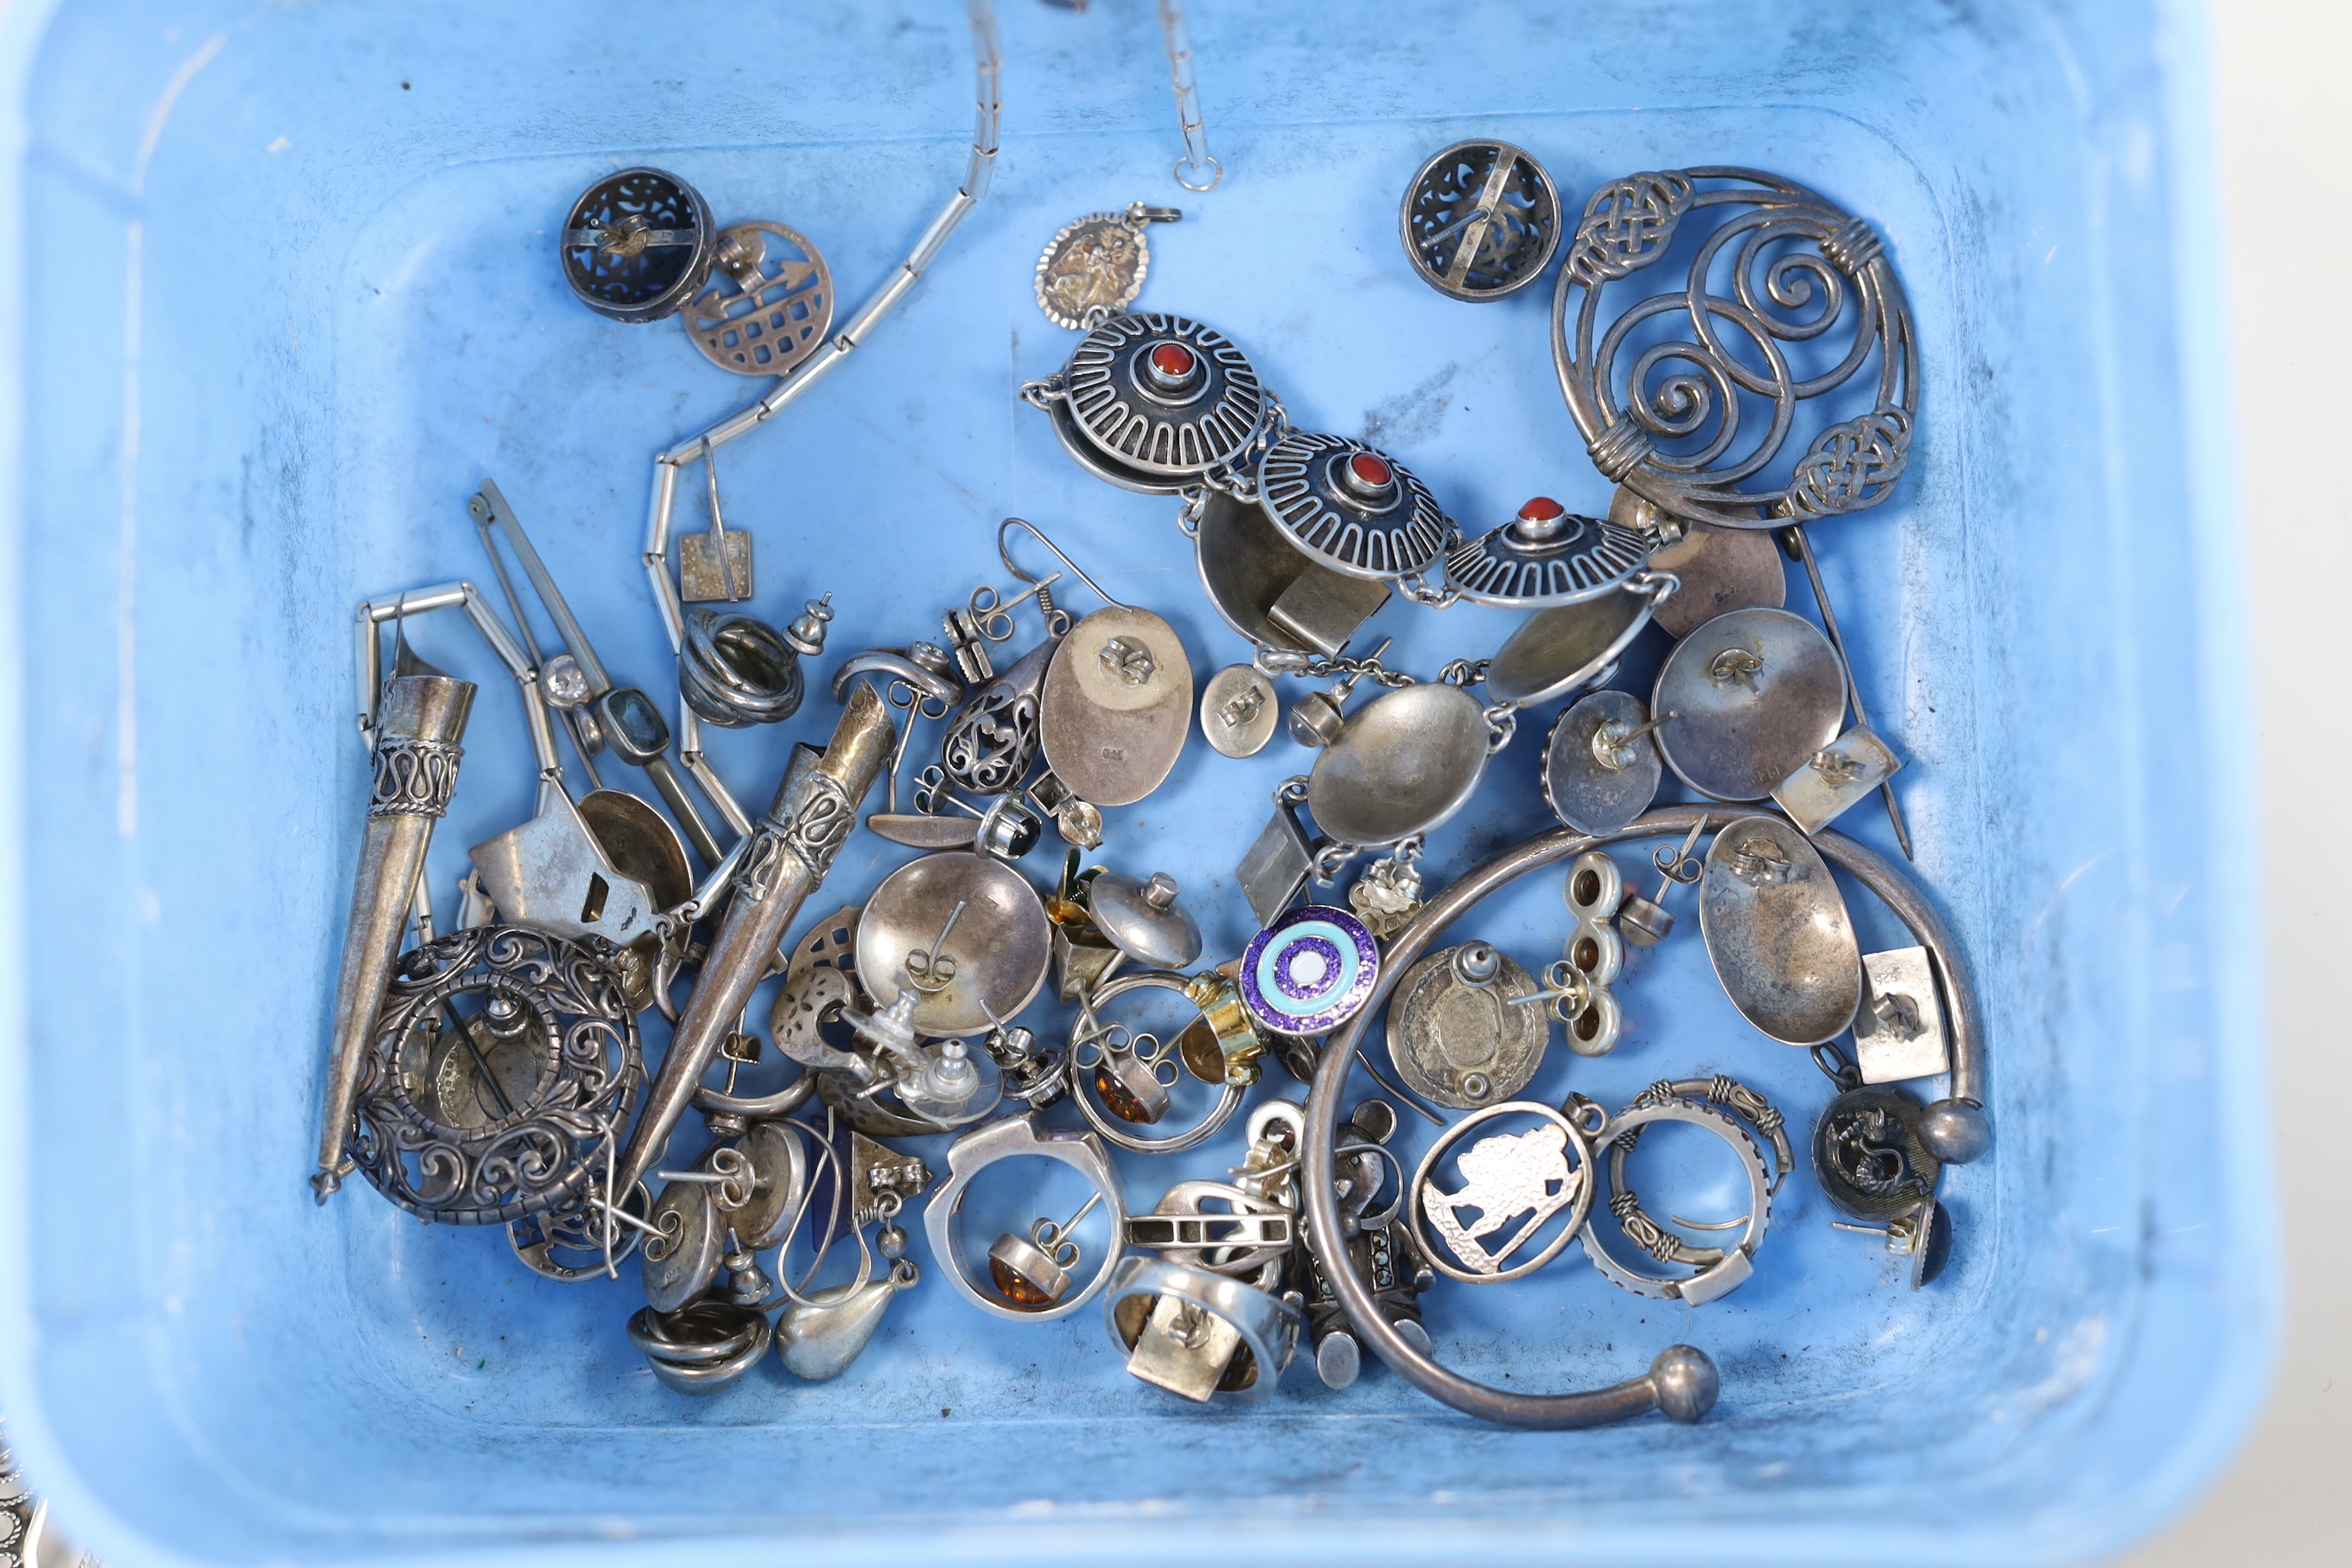 A quantity of assorted silver and white metal jewellery, including necklaces, brooches, rings, earrings, etc.